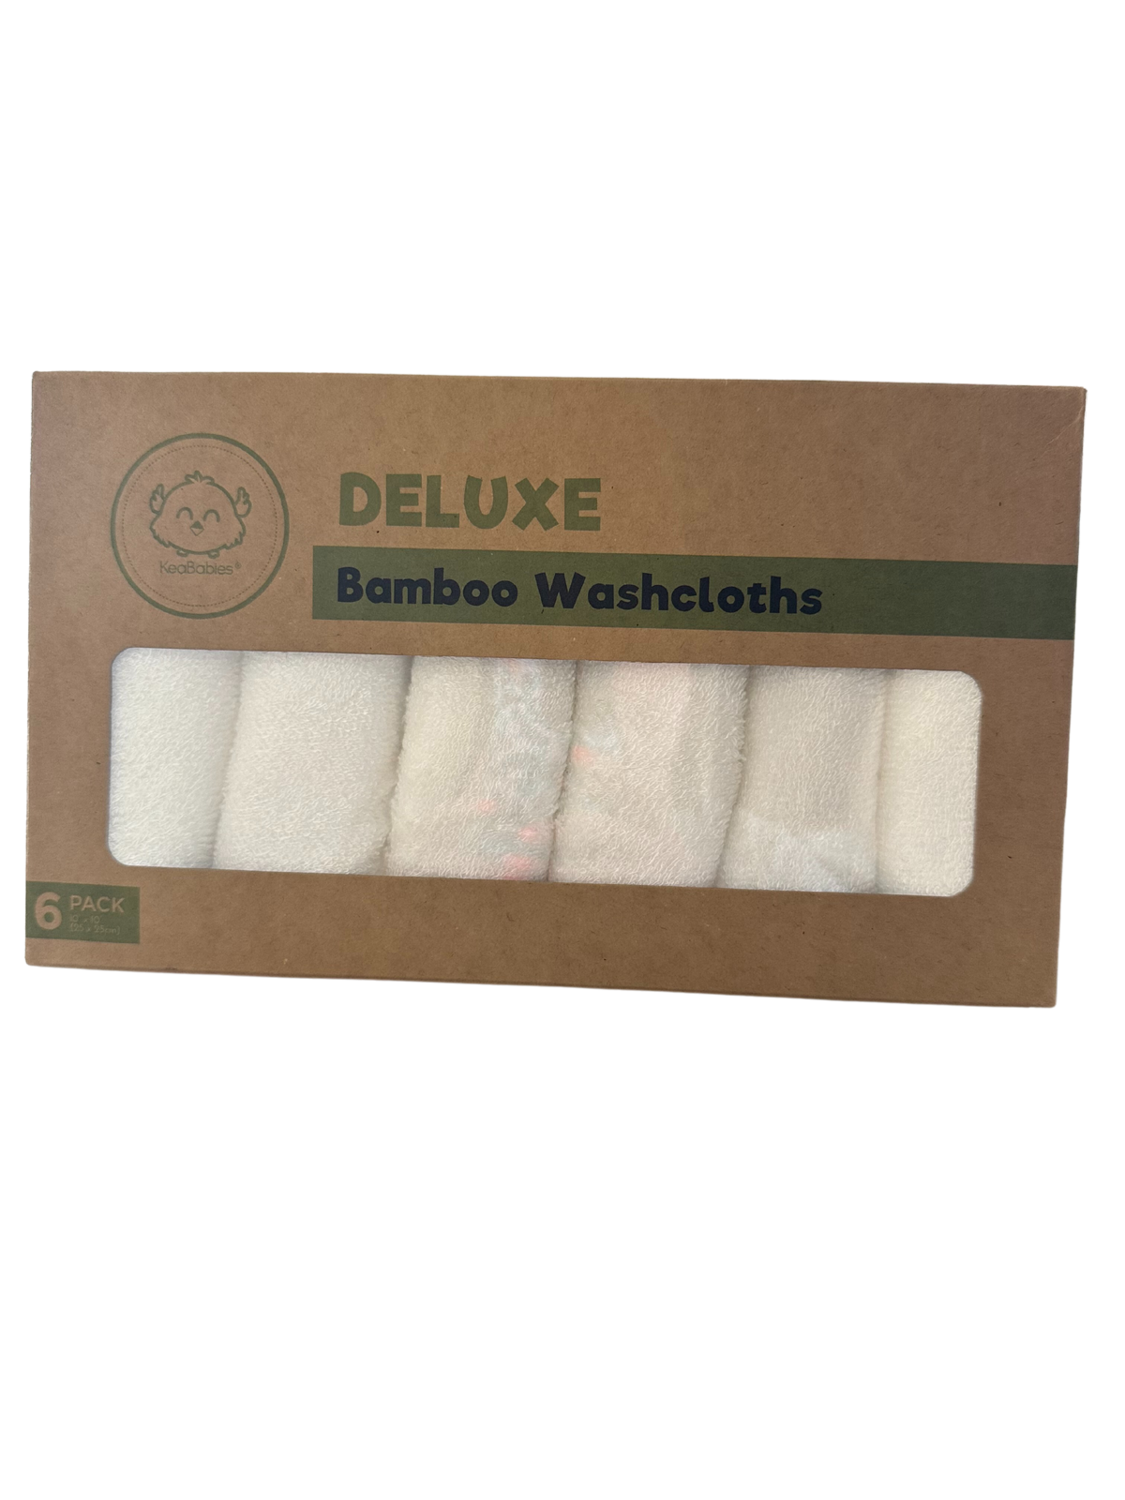 6 Pck Deluxe Bamboo Washcloths